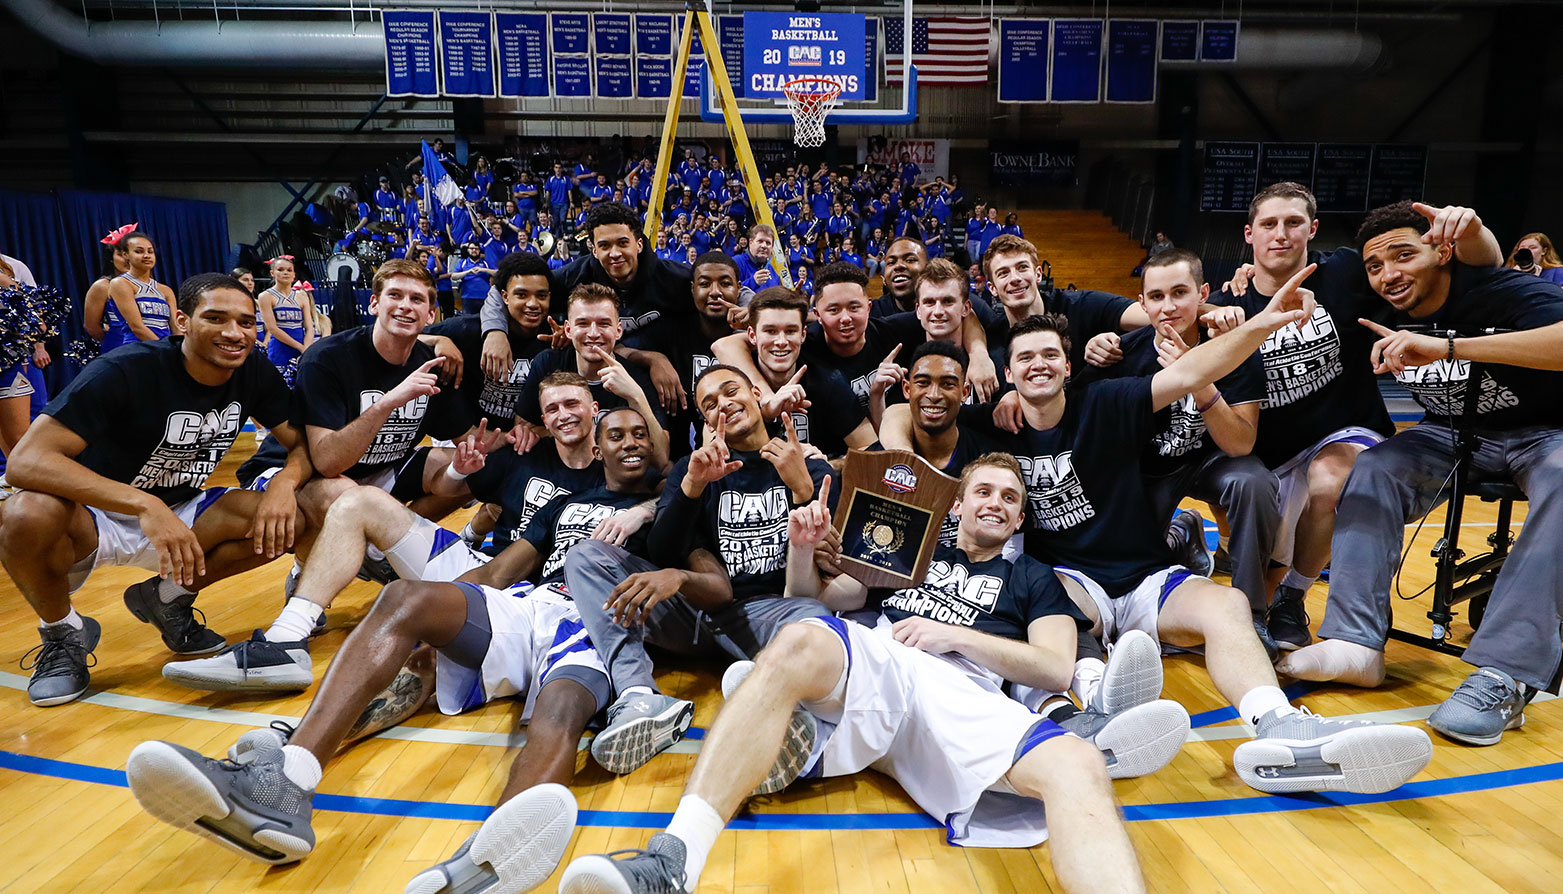 Christopher Newport Captures Third CAC Men's Basketball Championship; Carter Pours in Career-High 31 Points